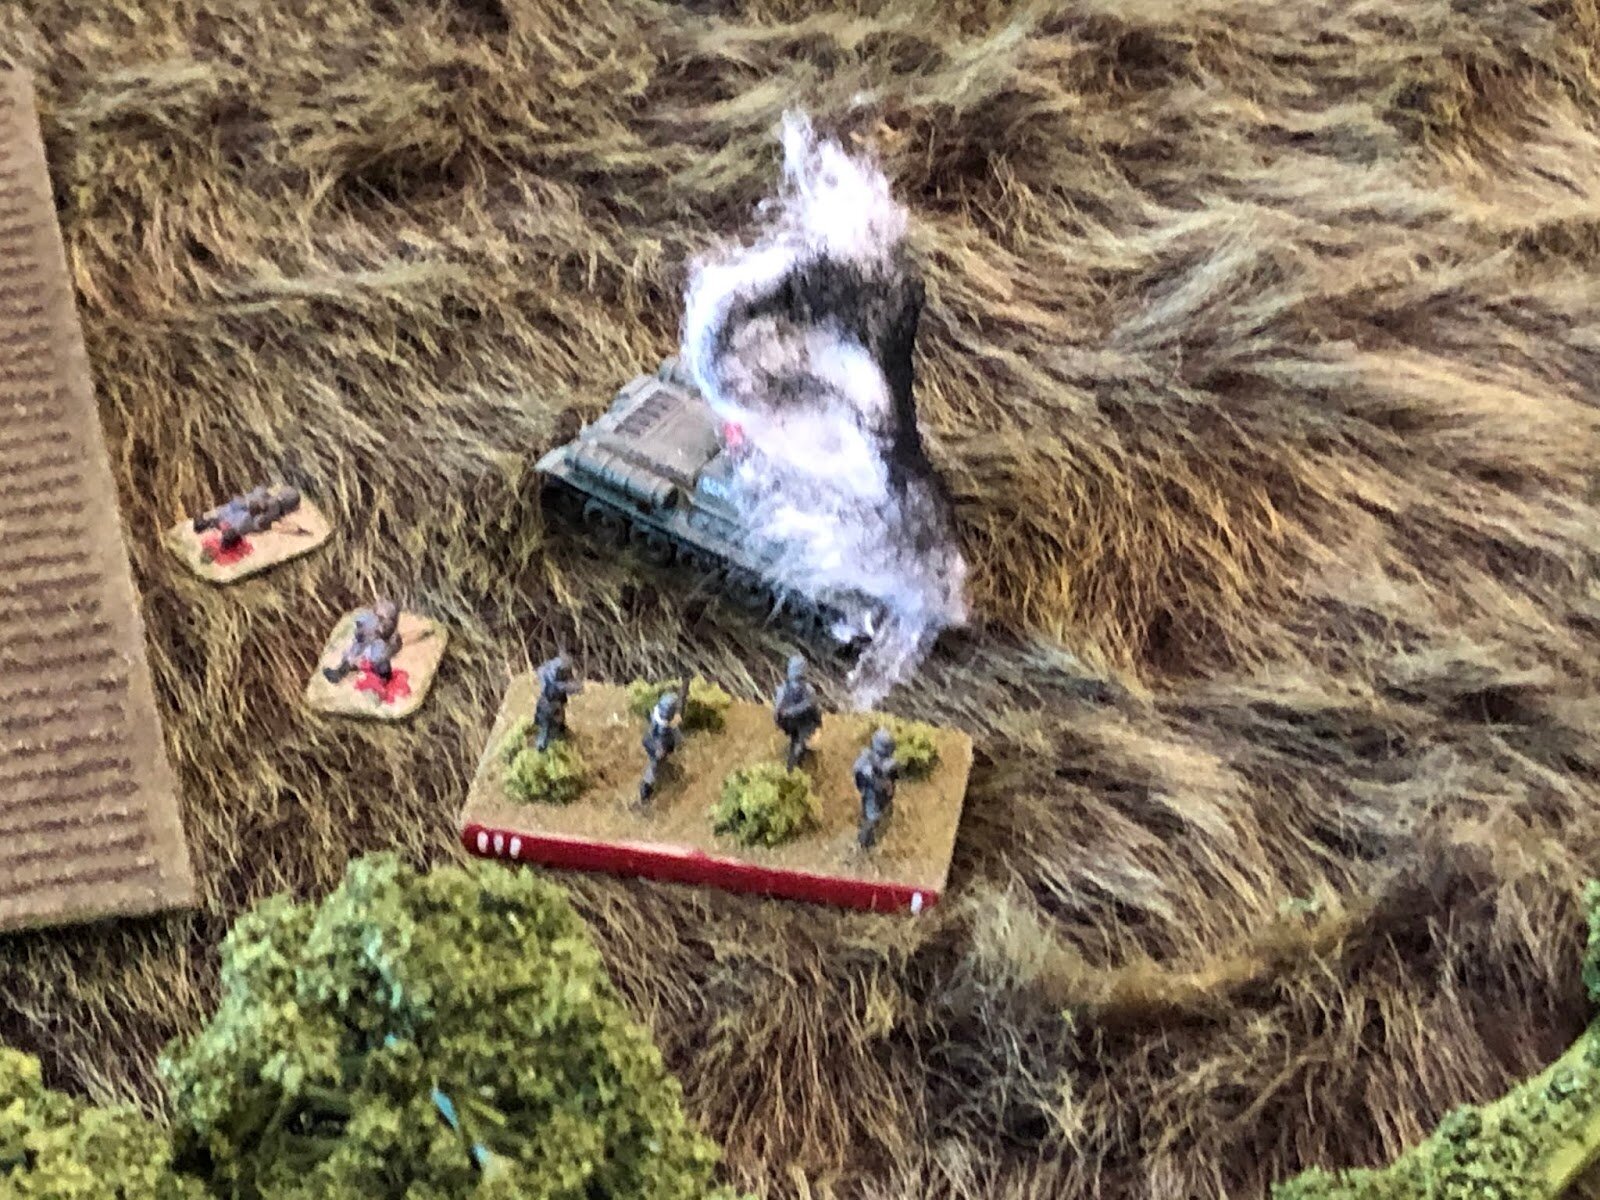  The German platoon commander took a bullet, but his men finished the job, knocking out the heavily armored beast!  